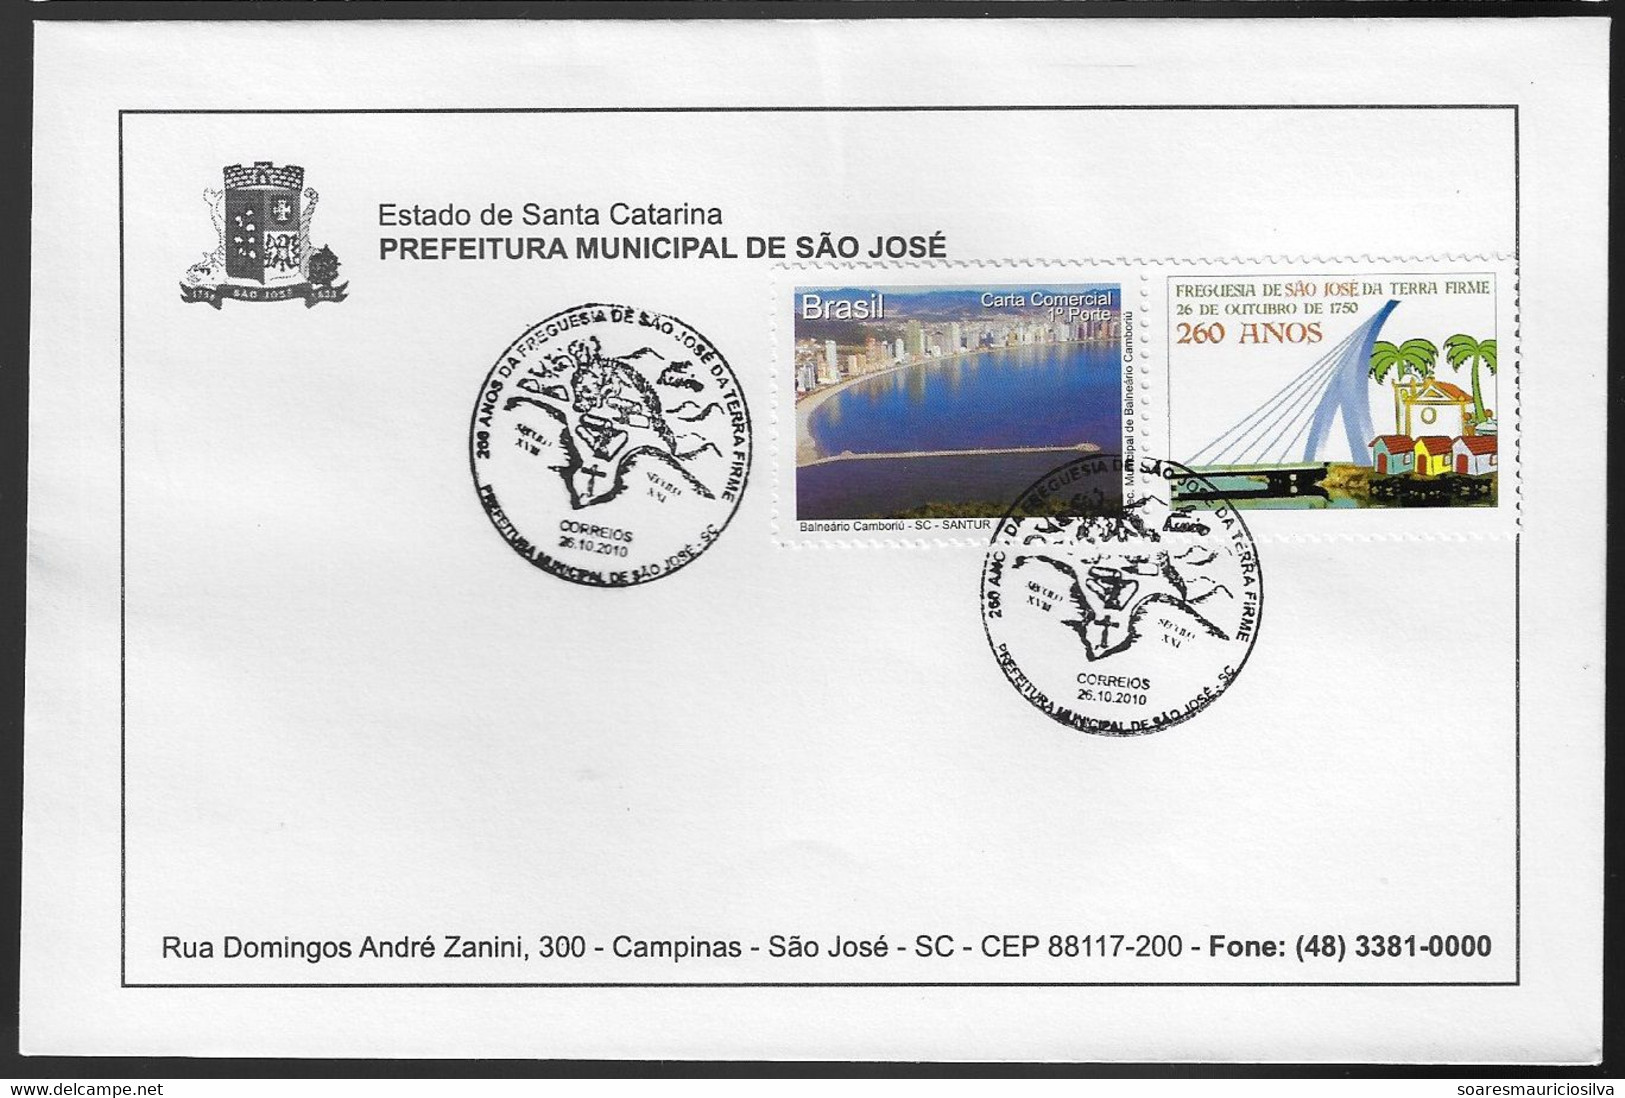 Brazil 2010 3 Cover With Personalized Stamp Turistical Sights of Santa Catarina 260 Years Parish São José Da Terra Firme - Personalized Stamps